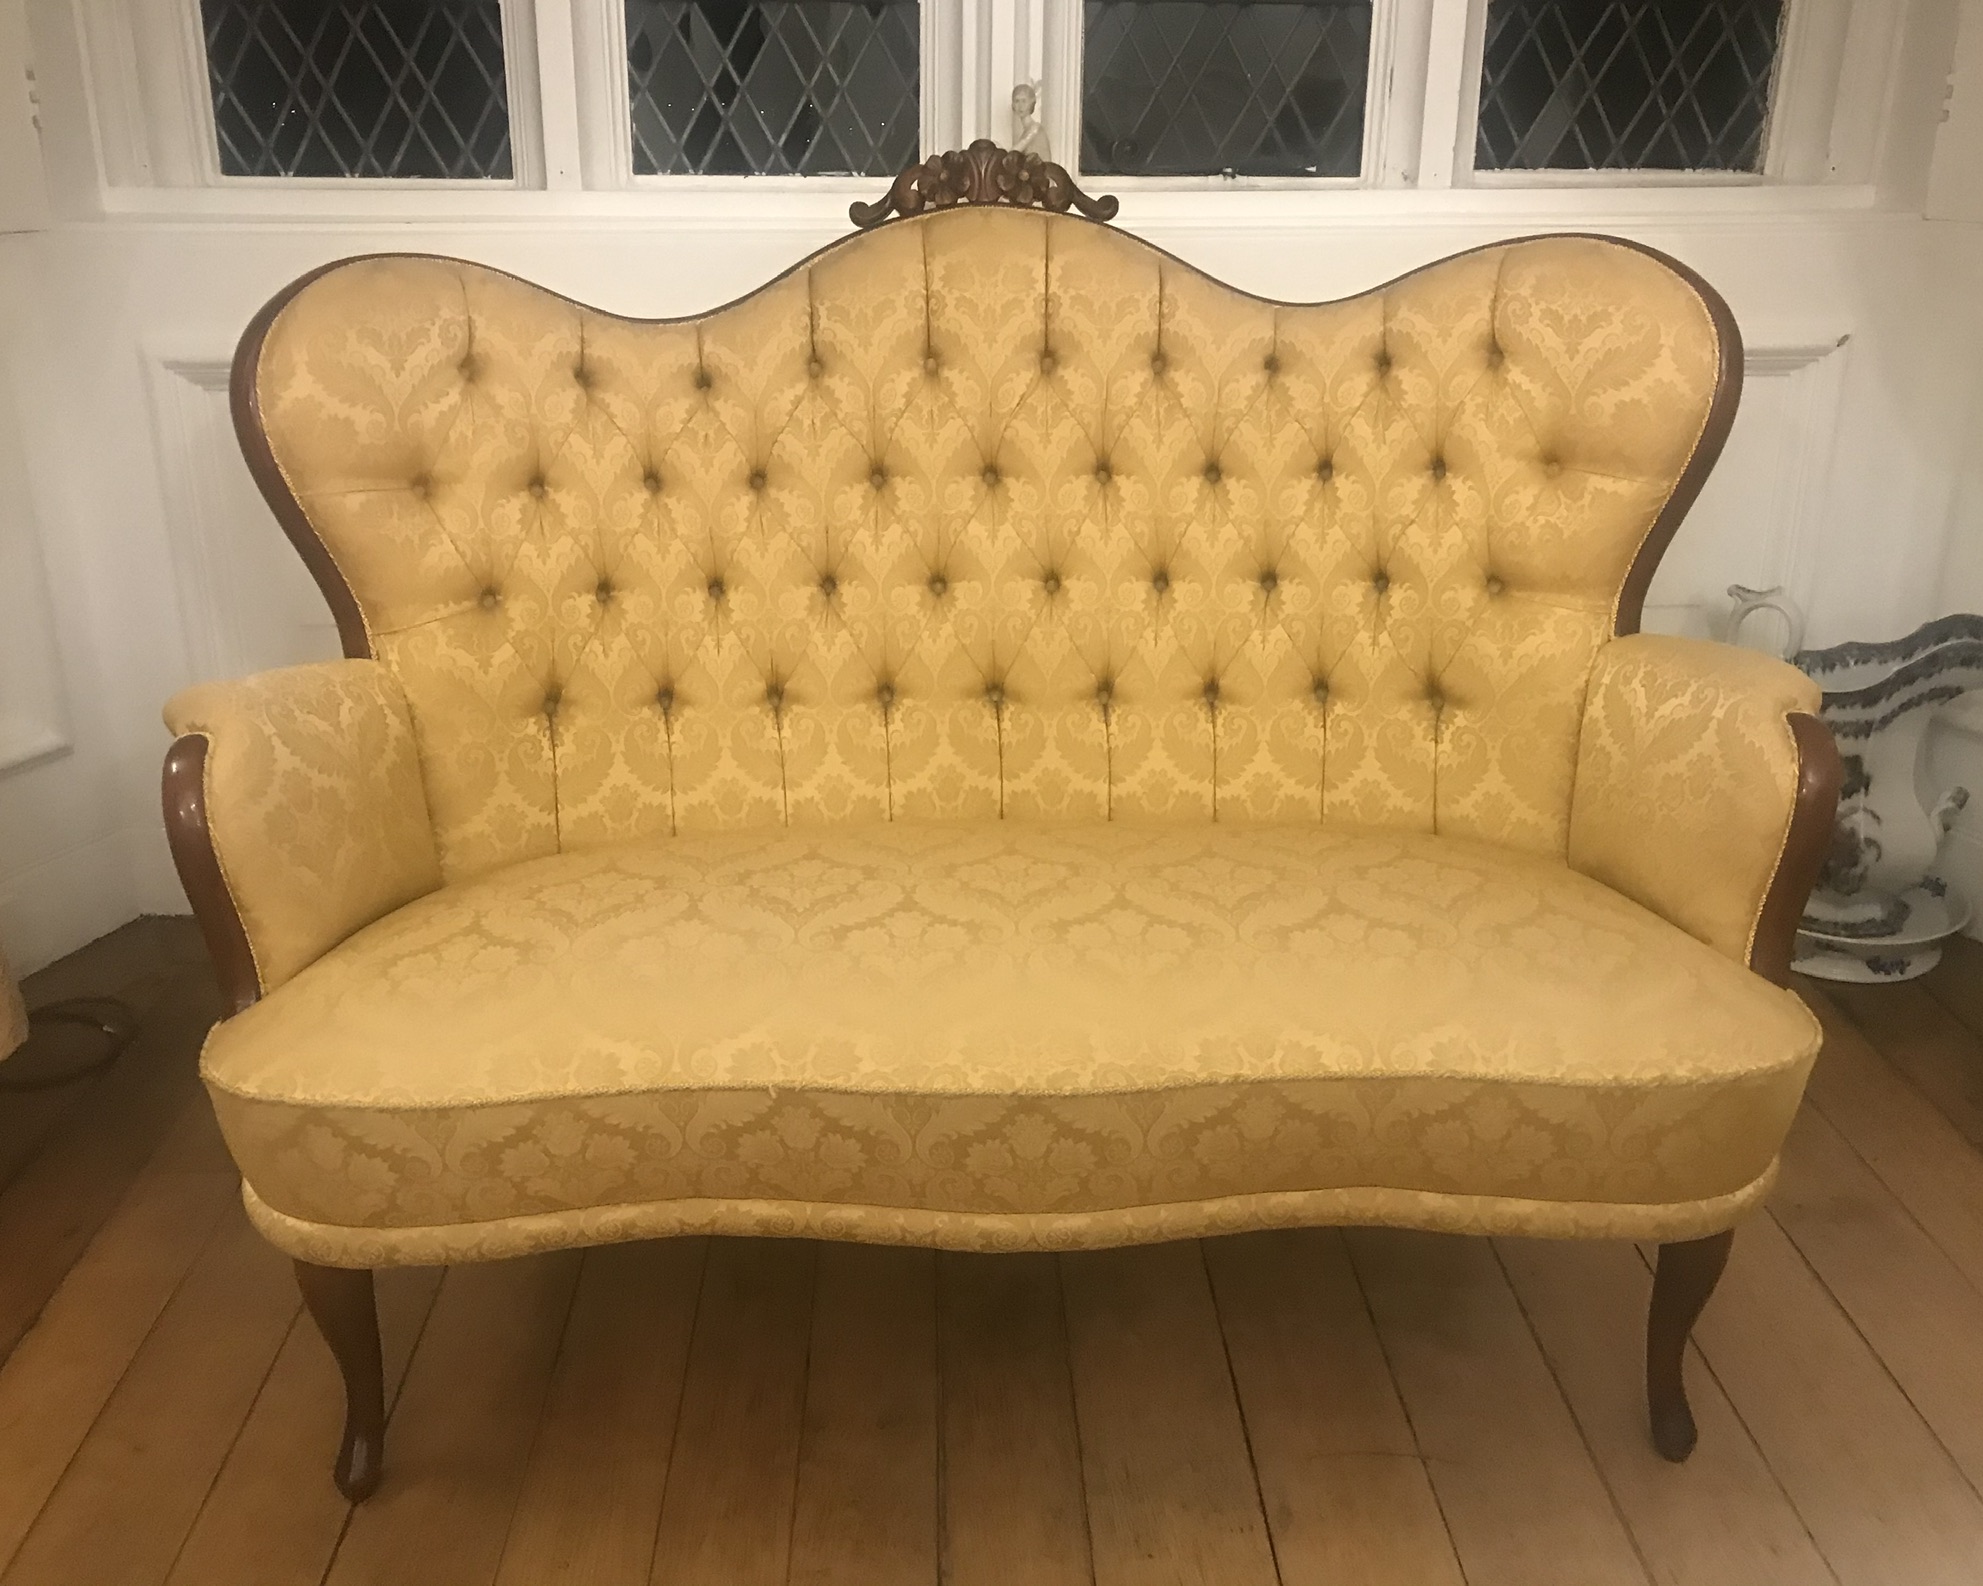 Two Seater Swept Back Upholstered Sofa - Image 12 of 12